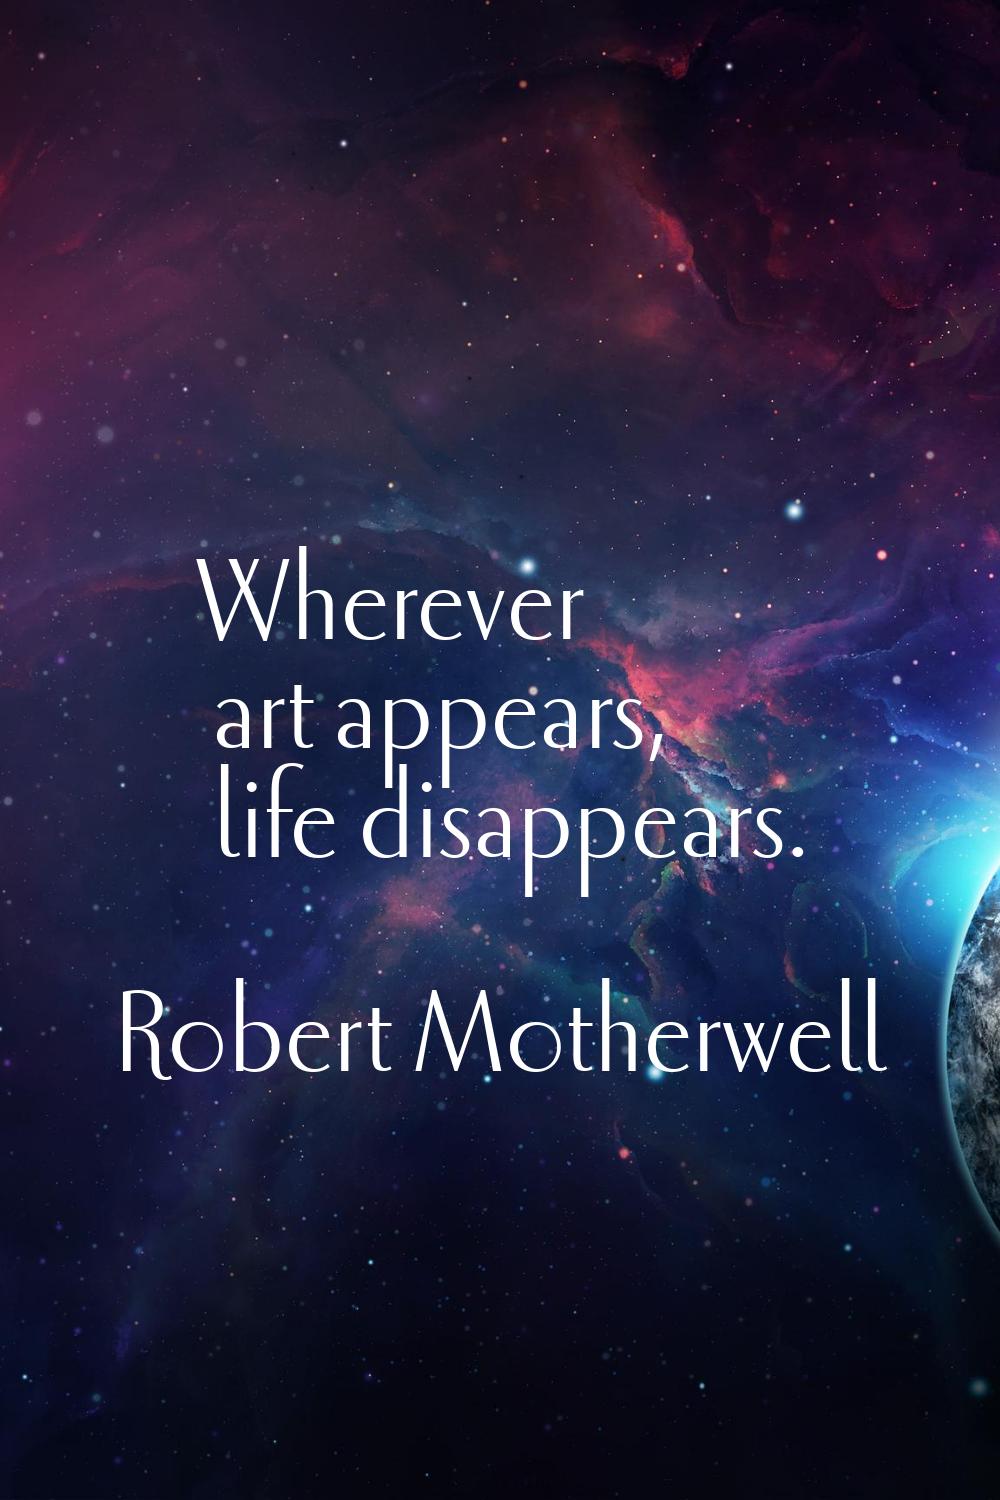 Wherever art appears, life disappears.